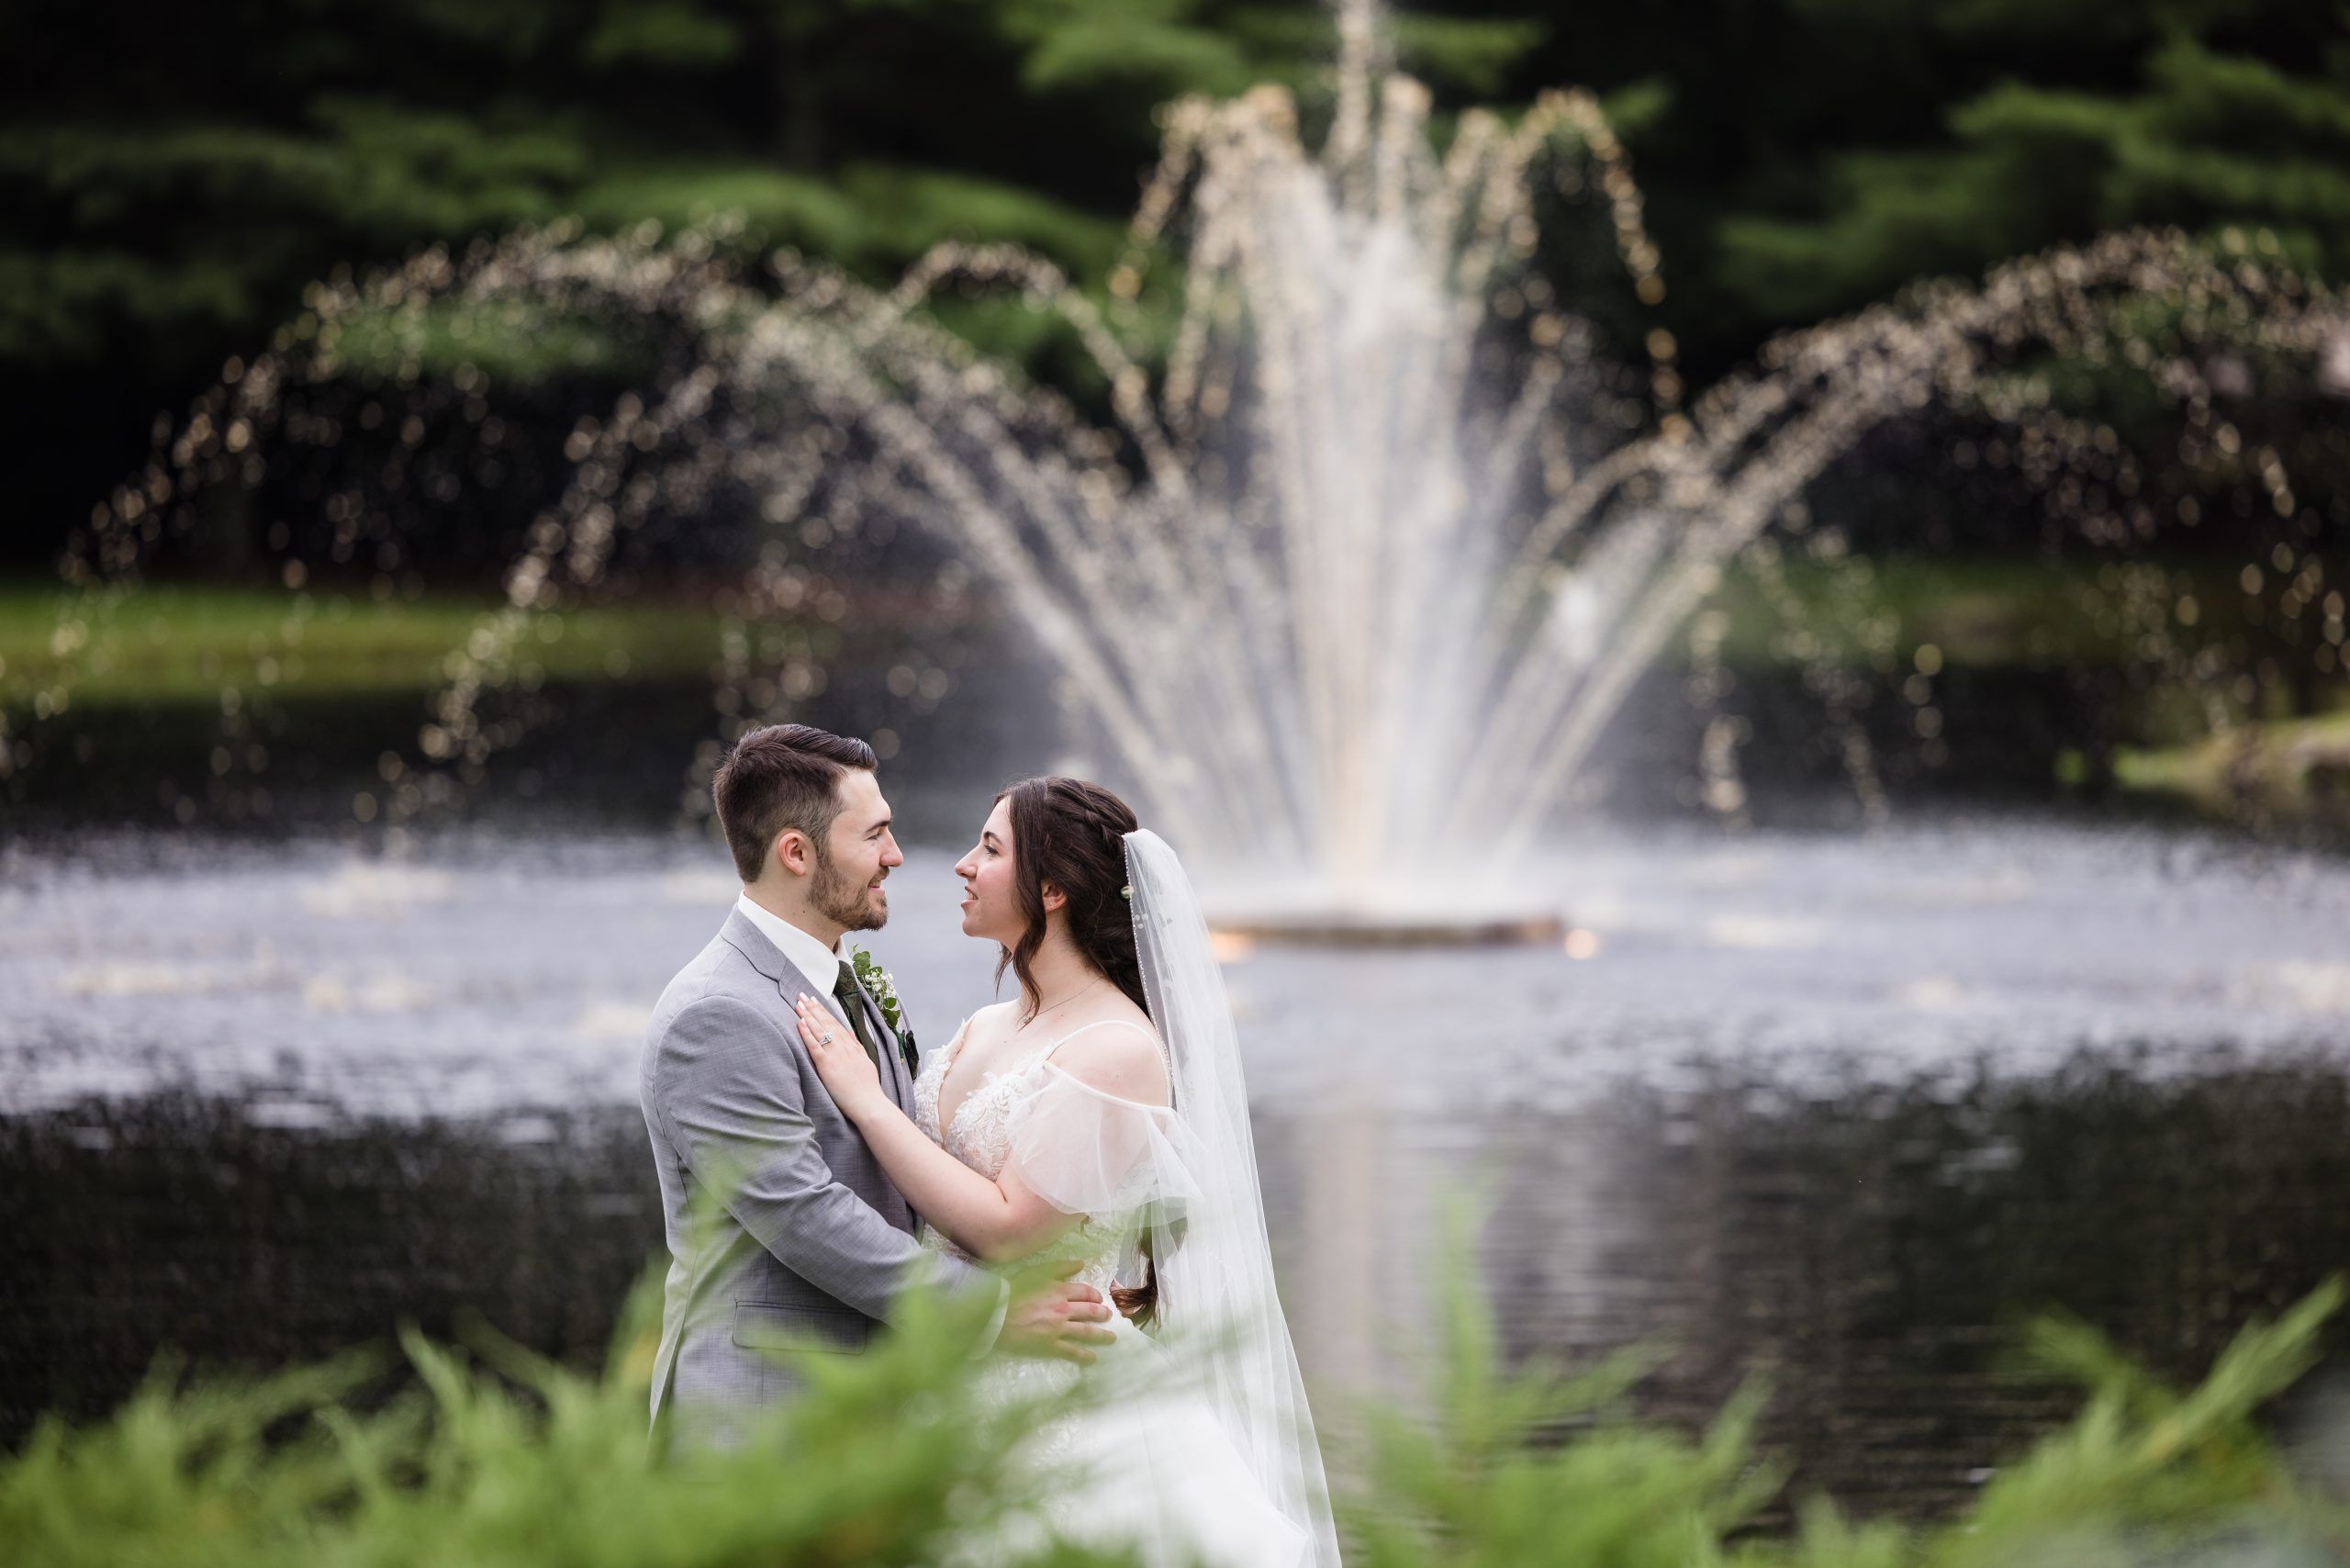 Bride and groom, water fountain.